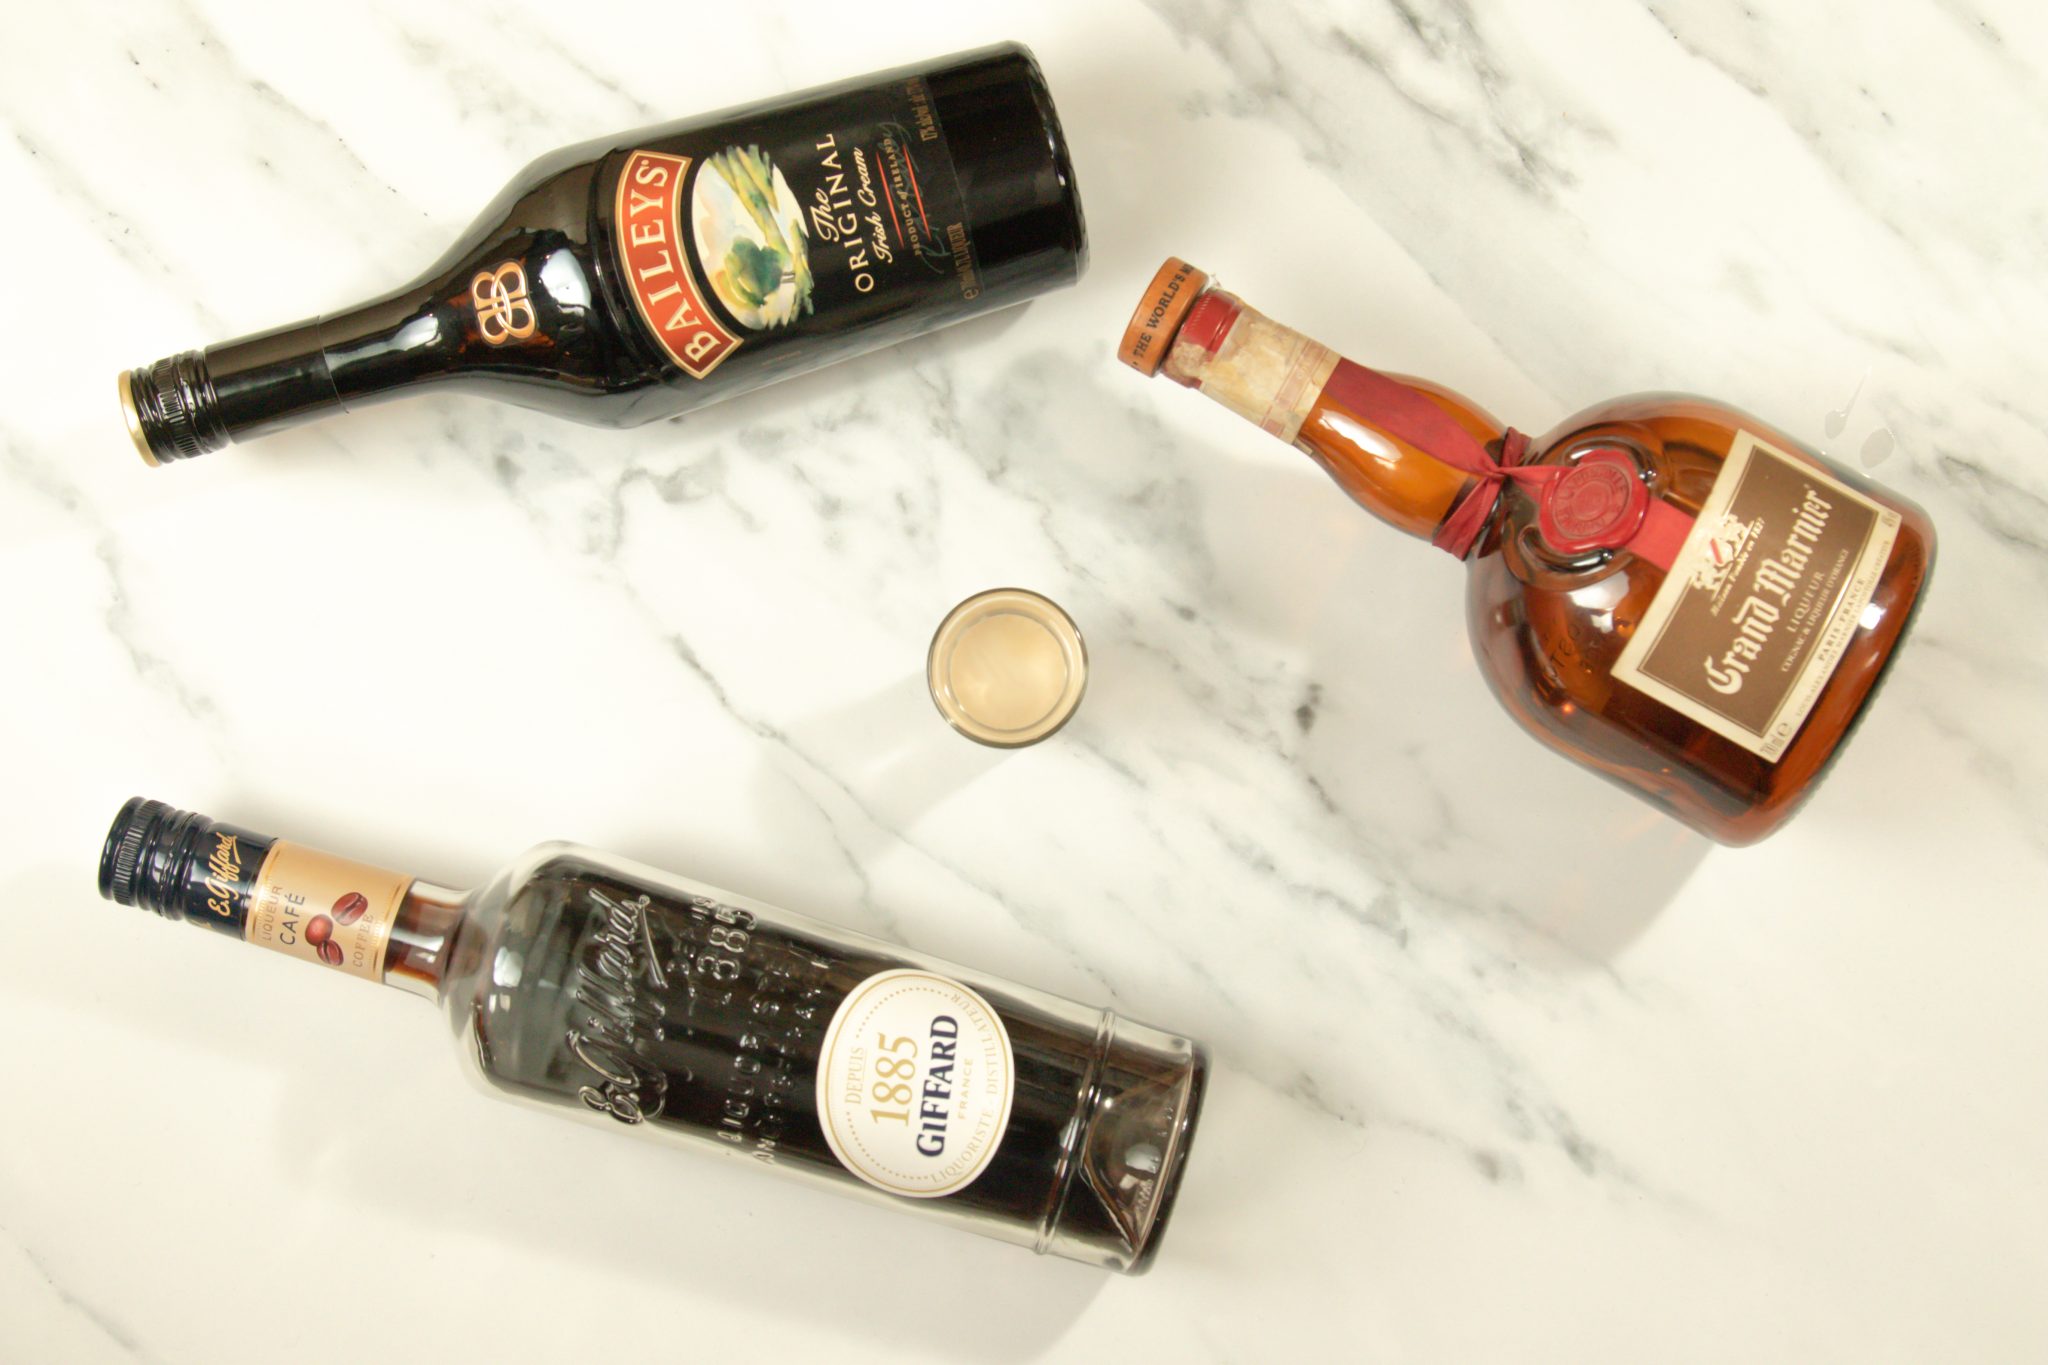 A B-52 cocktail, shot form above, on a white bar table surrounded by a Kahlúa bottle, a Bailey's Irish Cream bottle and a Grand Marnier bottle.